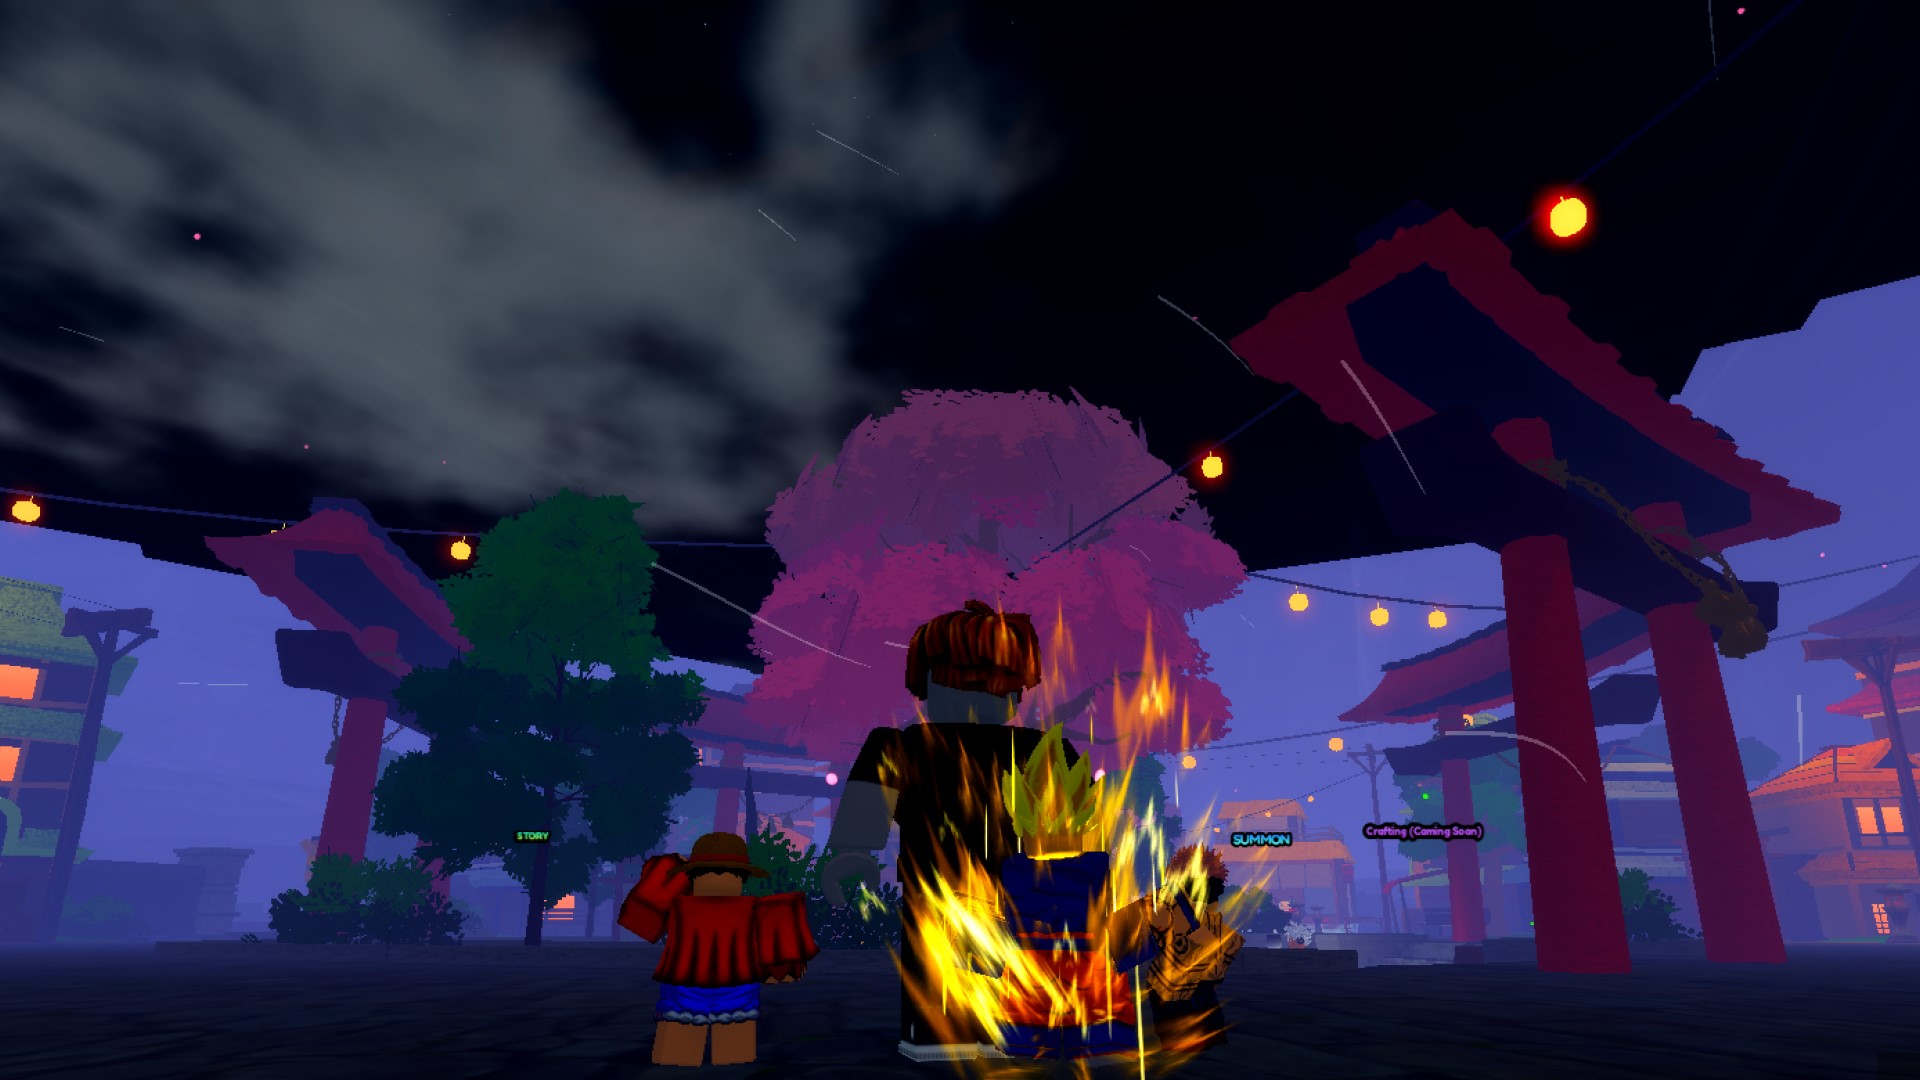 A character from Roblox game Anime Last Stand standing in front of a cherry blossom tree. It's dark, and clouds are drifting across the night sky.